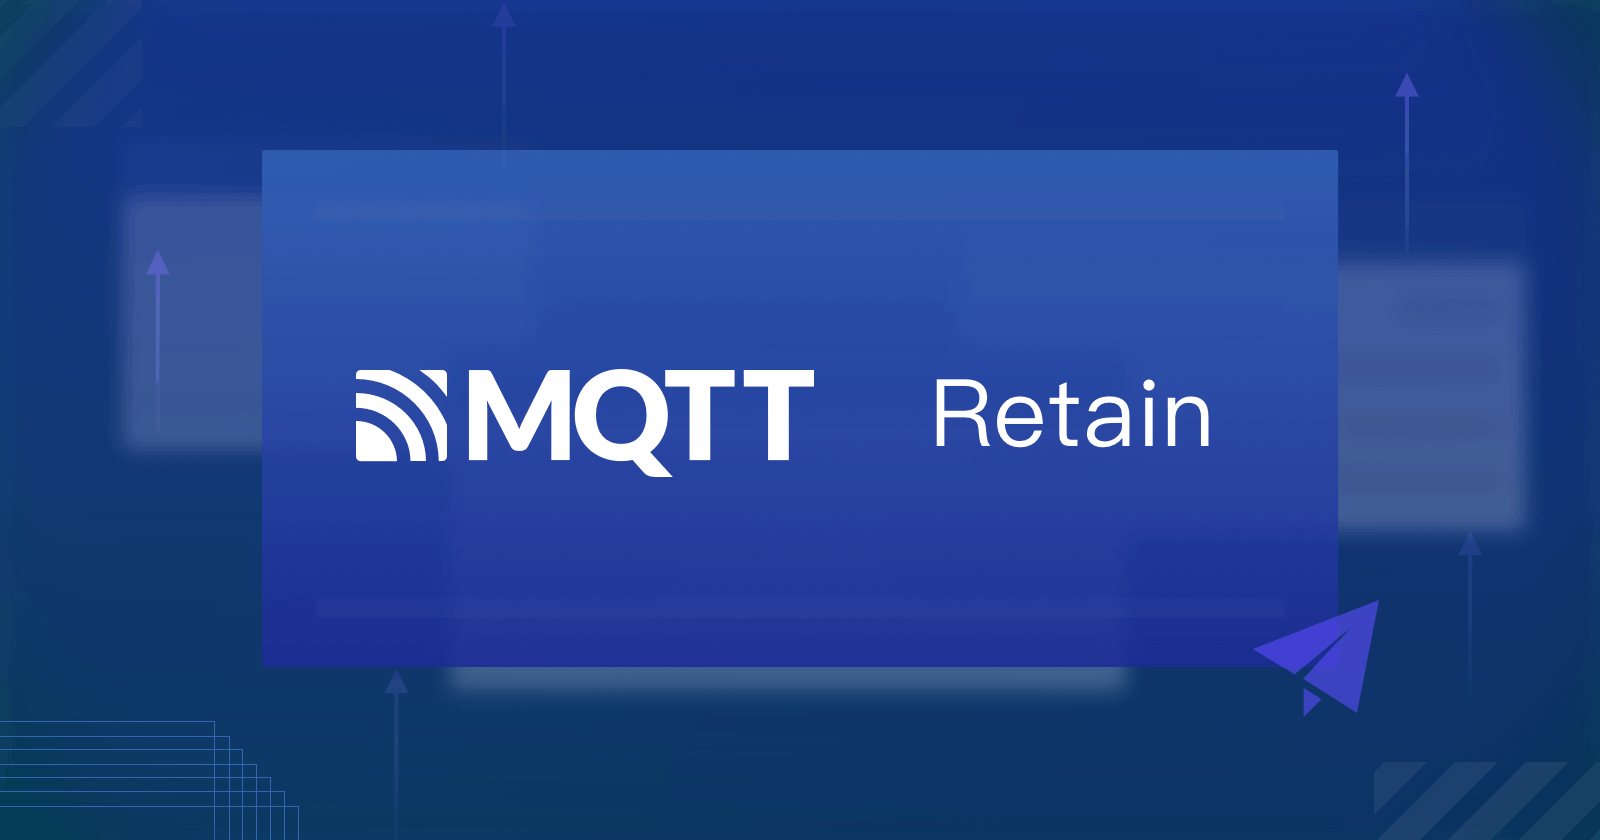 The Beginner's Guide to MQTT Retained Messages